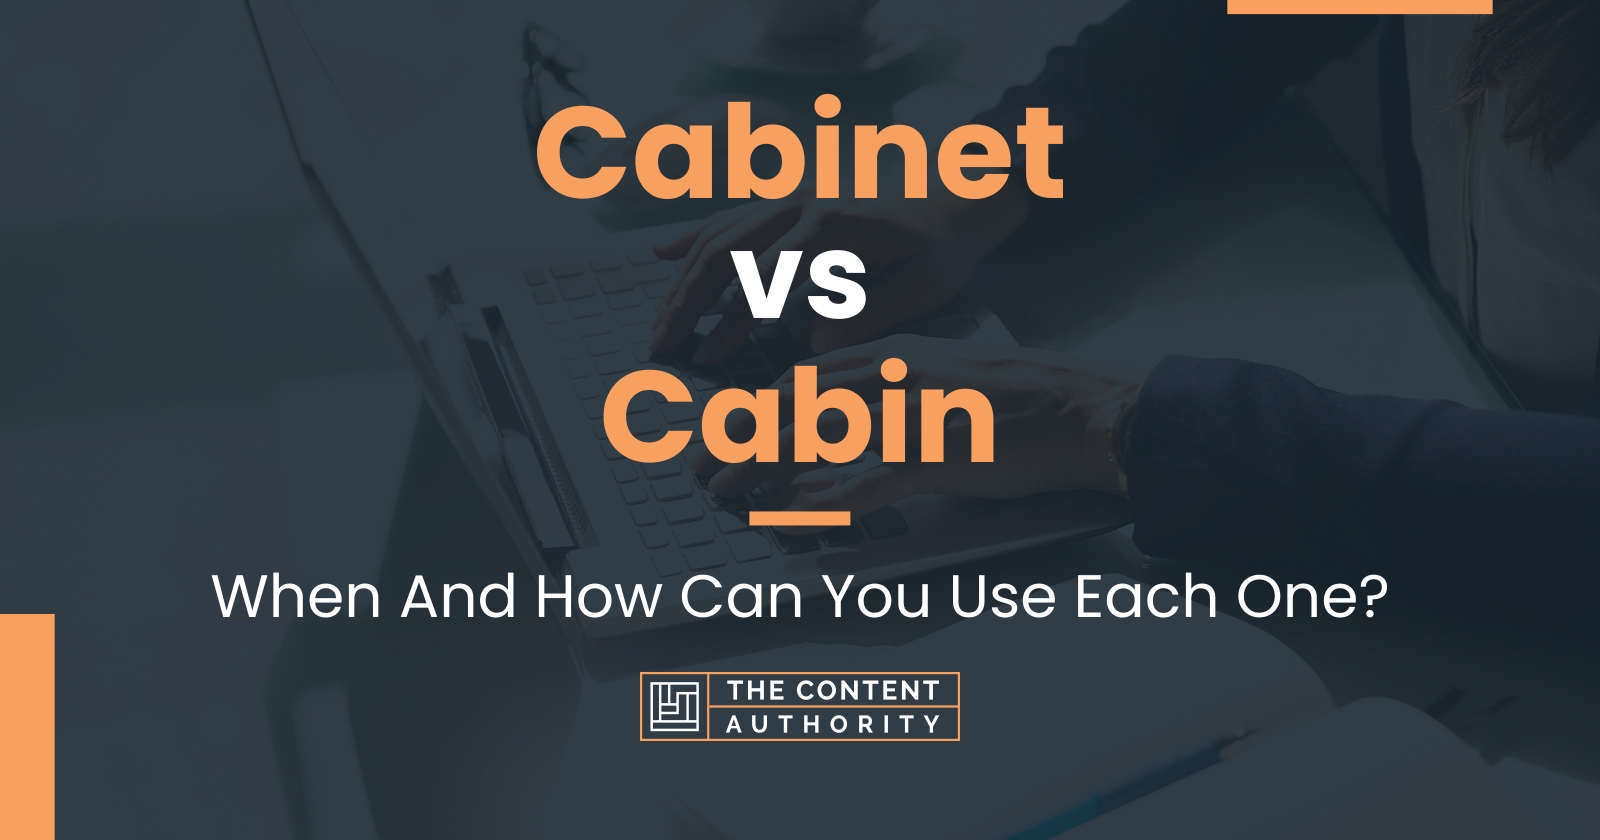 Cabinet vs Cabin: When And How Can You Use Each One?